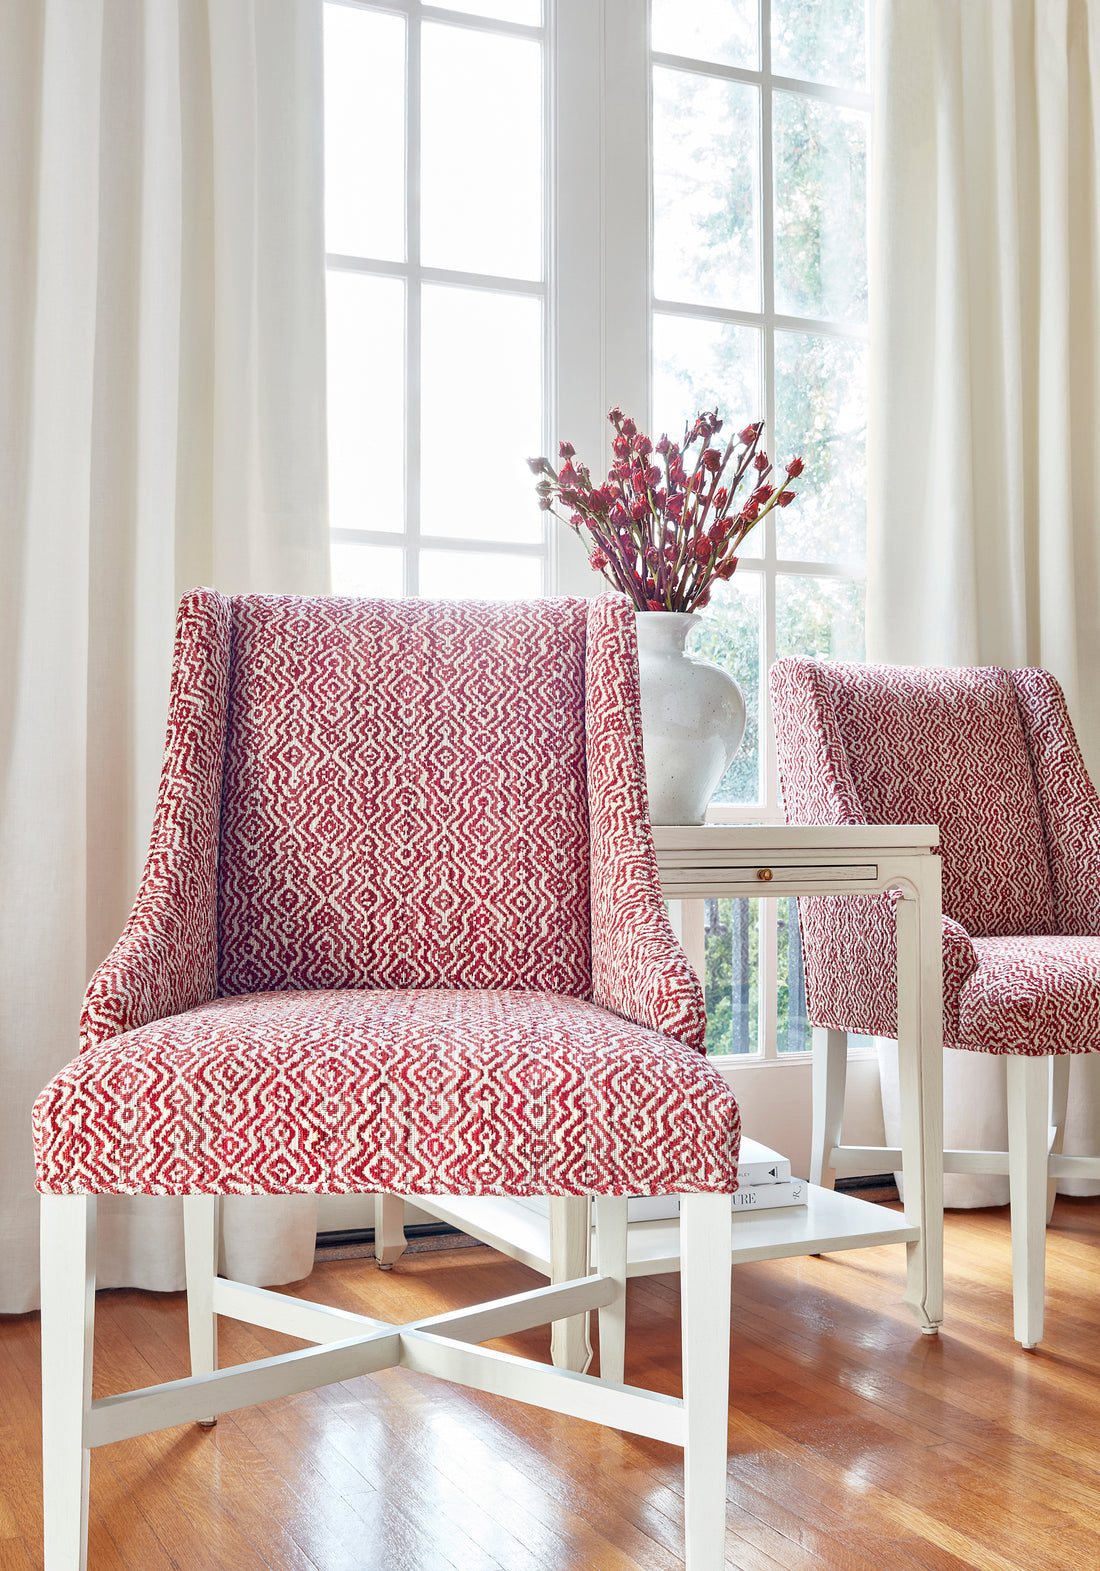 Frontal view of Hayden Dining Chair in Anstasia woven fabric in cardinal color - pattern number W80690 - by Thibaut in the Woven Resource Vol 11 Rialto collection